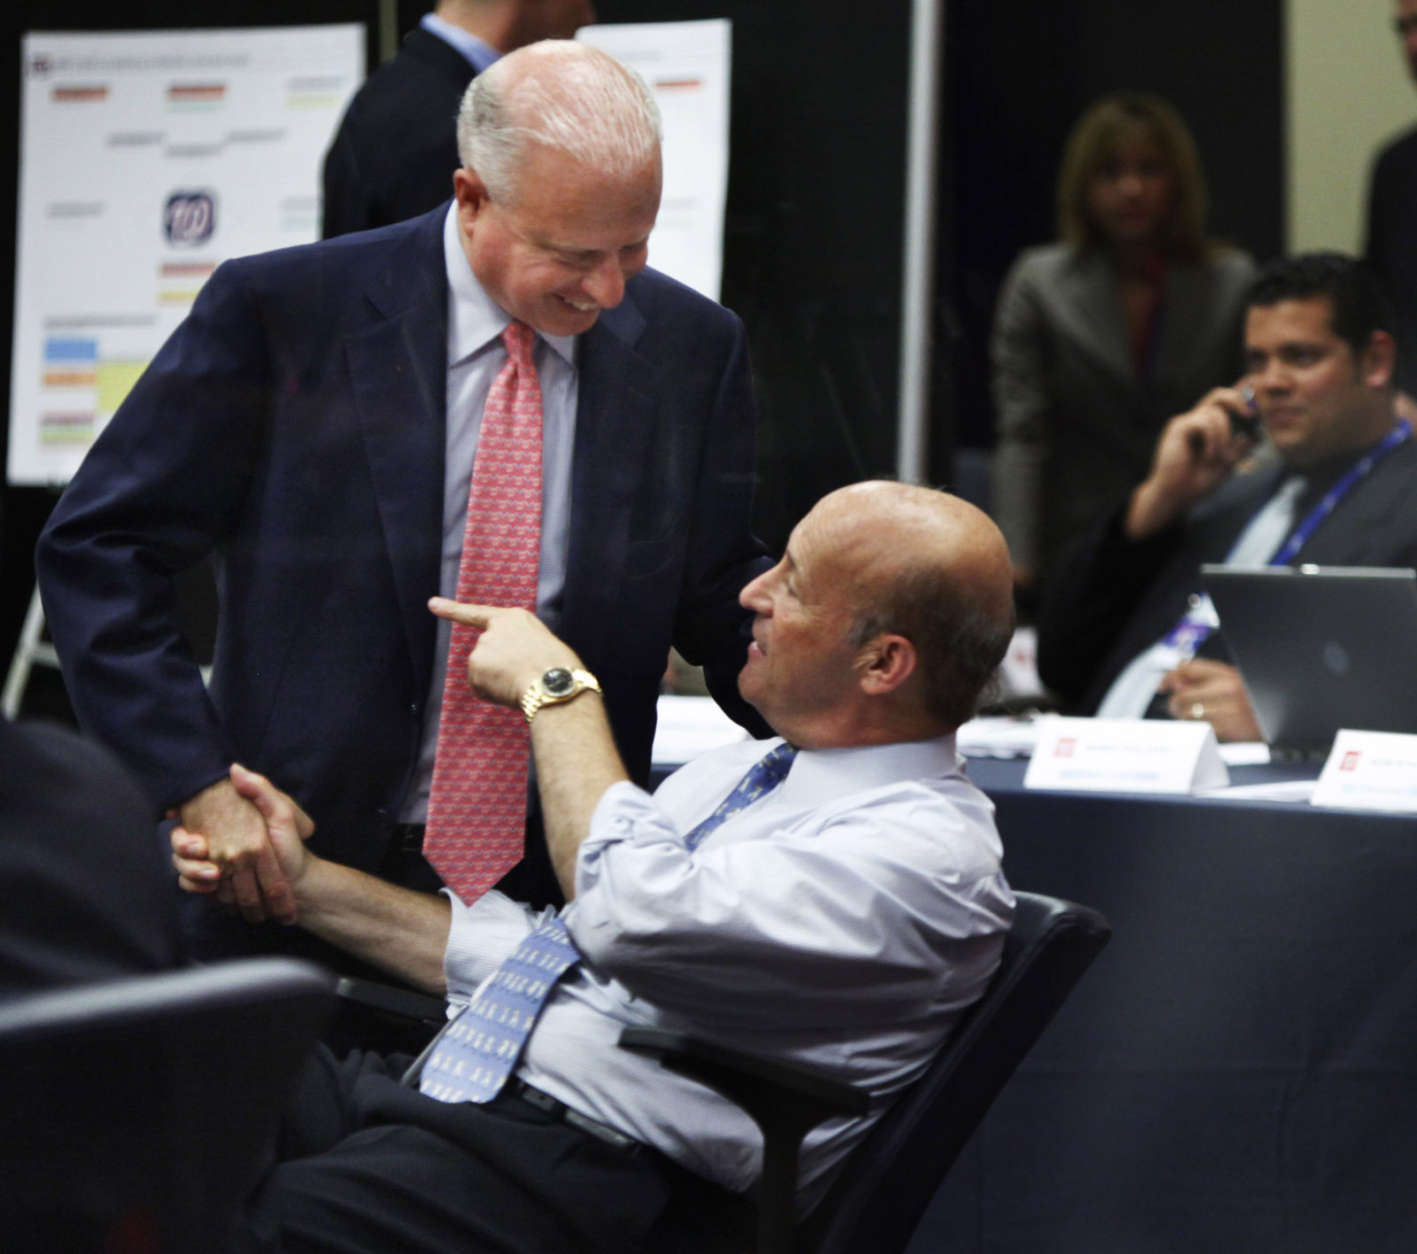 Washington Nationals owner Mark Lerner, left, shakes hands with the baseball team's president, Stan Kasten, right, after the Nationals selected pitcher Stephen Strasburg with the first pick in the baseball draft, at Nationals Park in Washington, Tuesday, June 9, 2009. (AP Photo/Manuel Balce Ceneta)